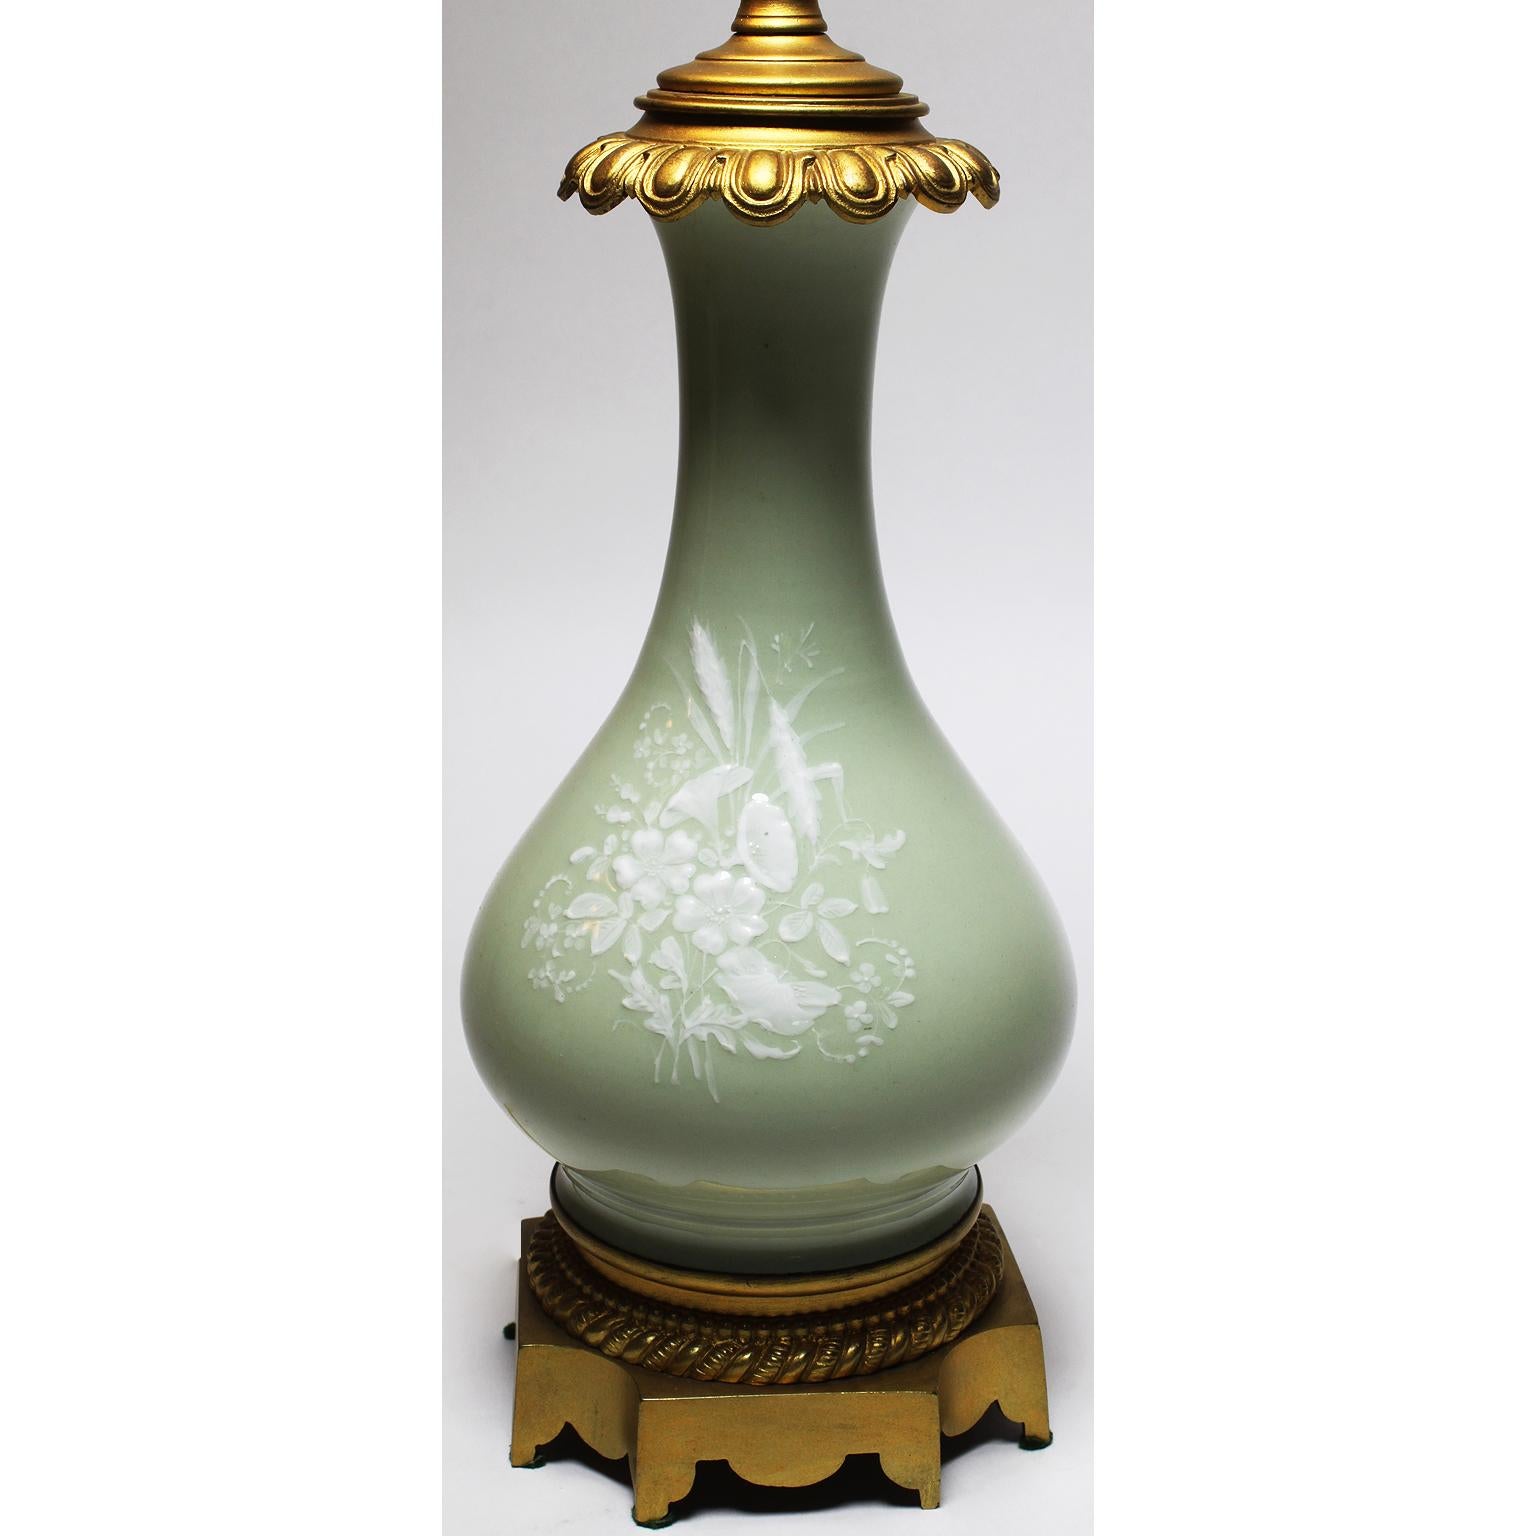 A fine pair of French 19th-20th century Pâte-sur-Pâte Porcelain and gilt-bronze mounted ovoid-shaped table lamps with a white low-relief floral design carved in slip and applied to a contrasting body over the blue-green porcelain, Paris, circa